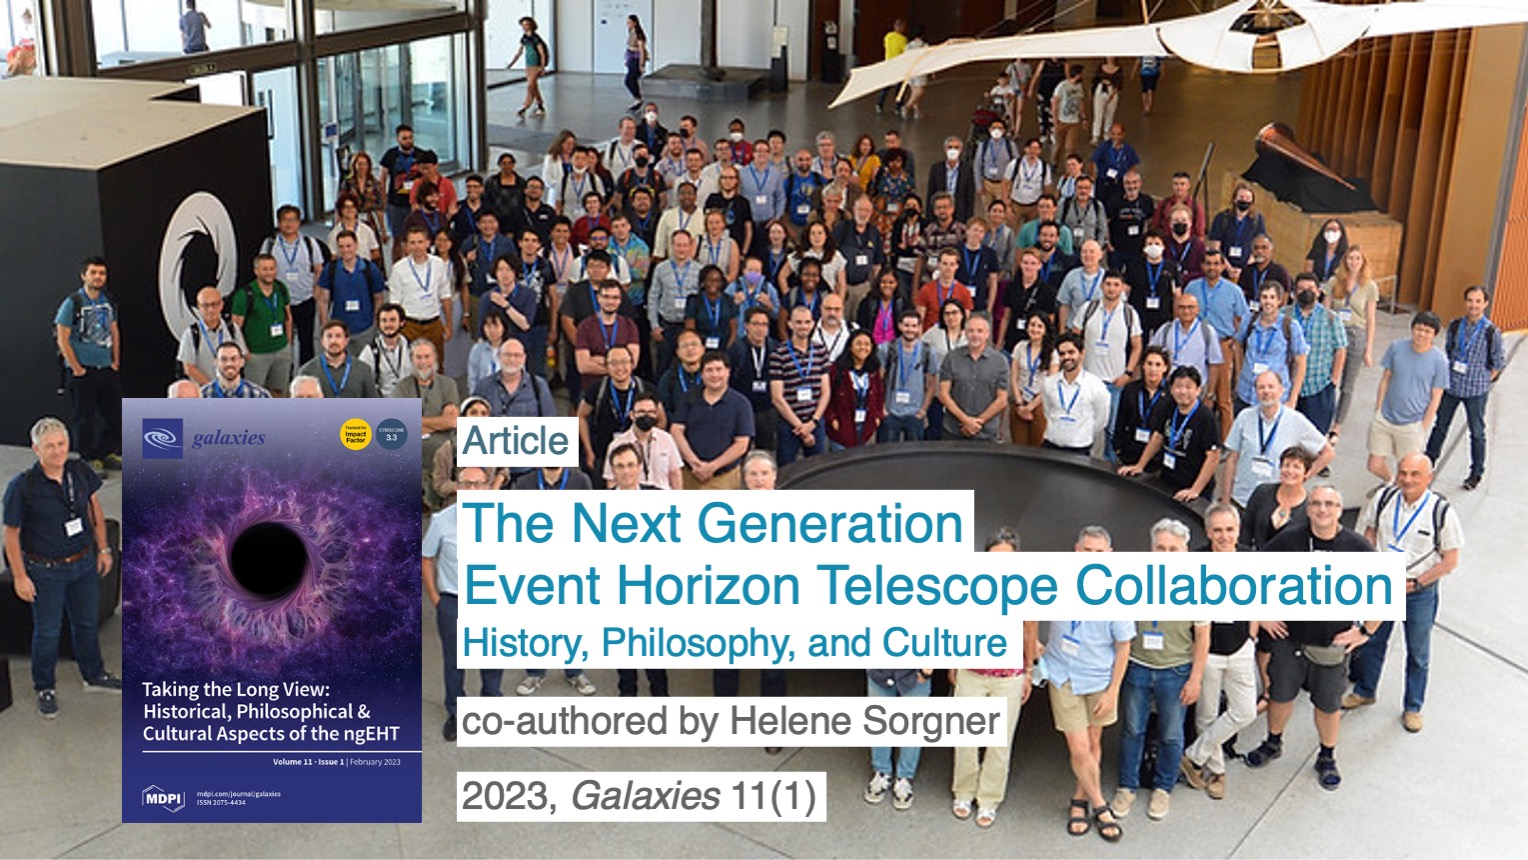 Helene Sorgner et al: The Next Generation Event Horizon Telescope Collaboration: History, Philosophy, and Culture. 2023, Galaxies 11(1).